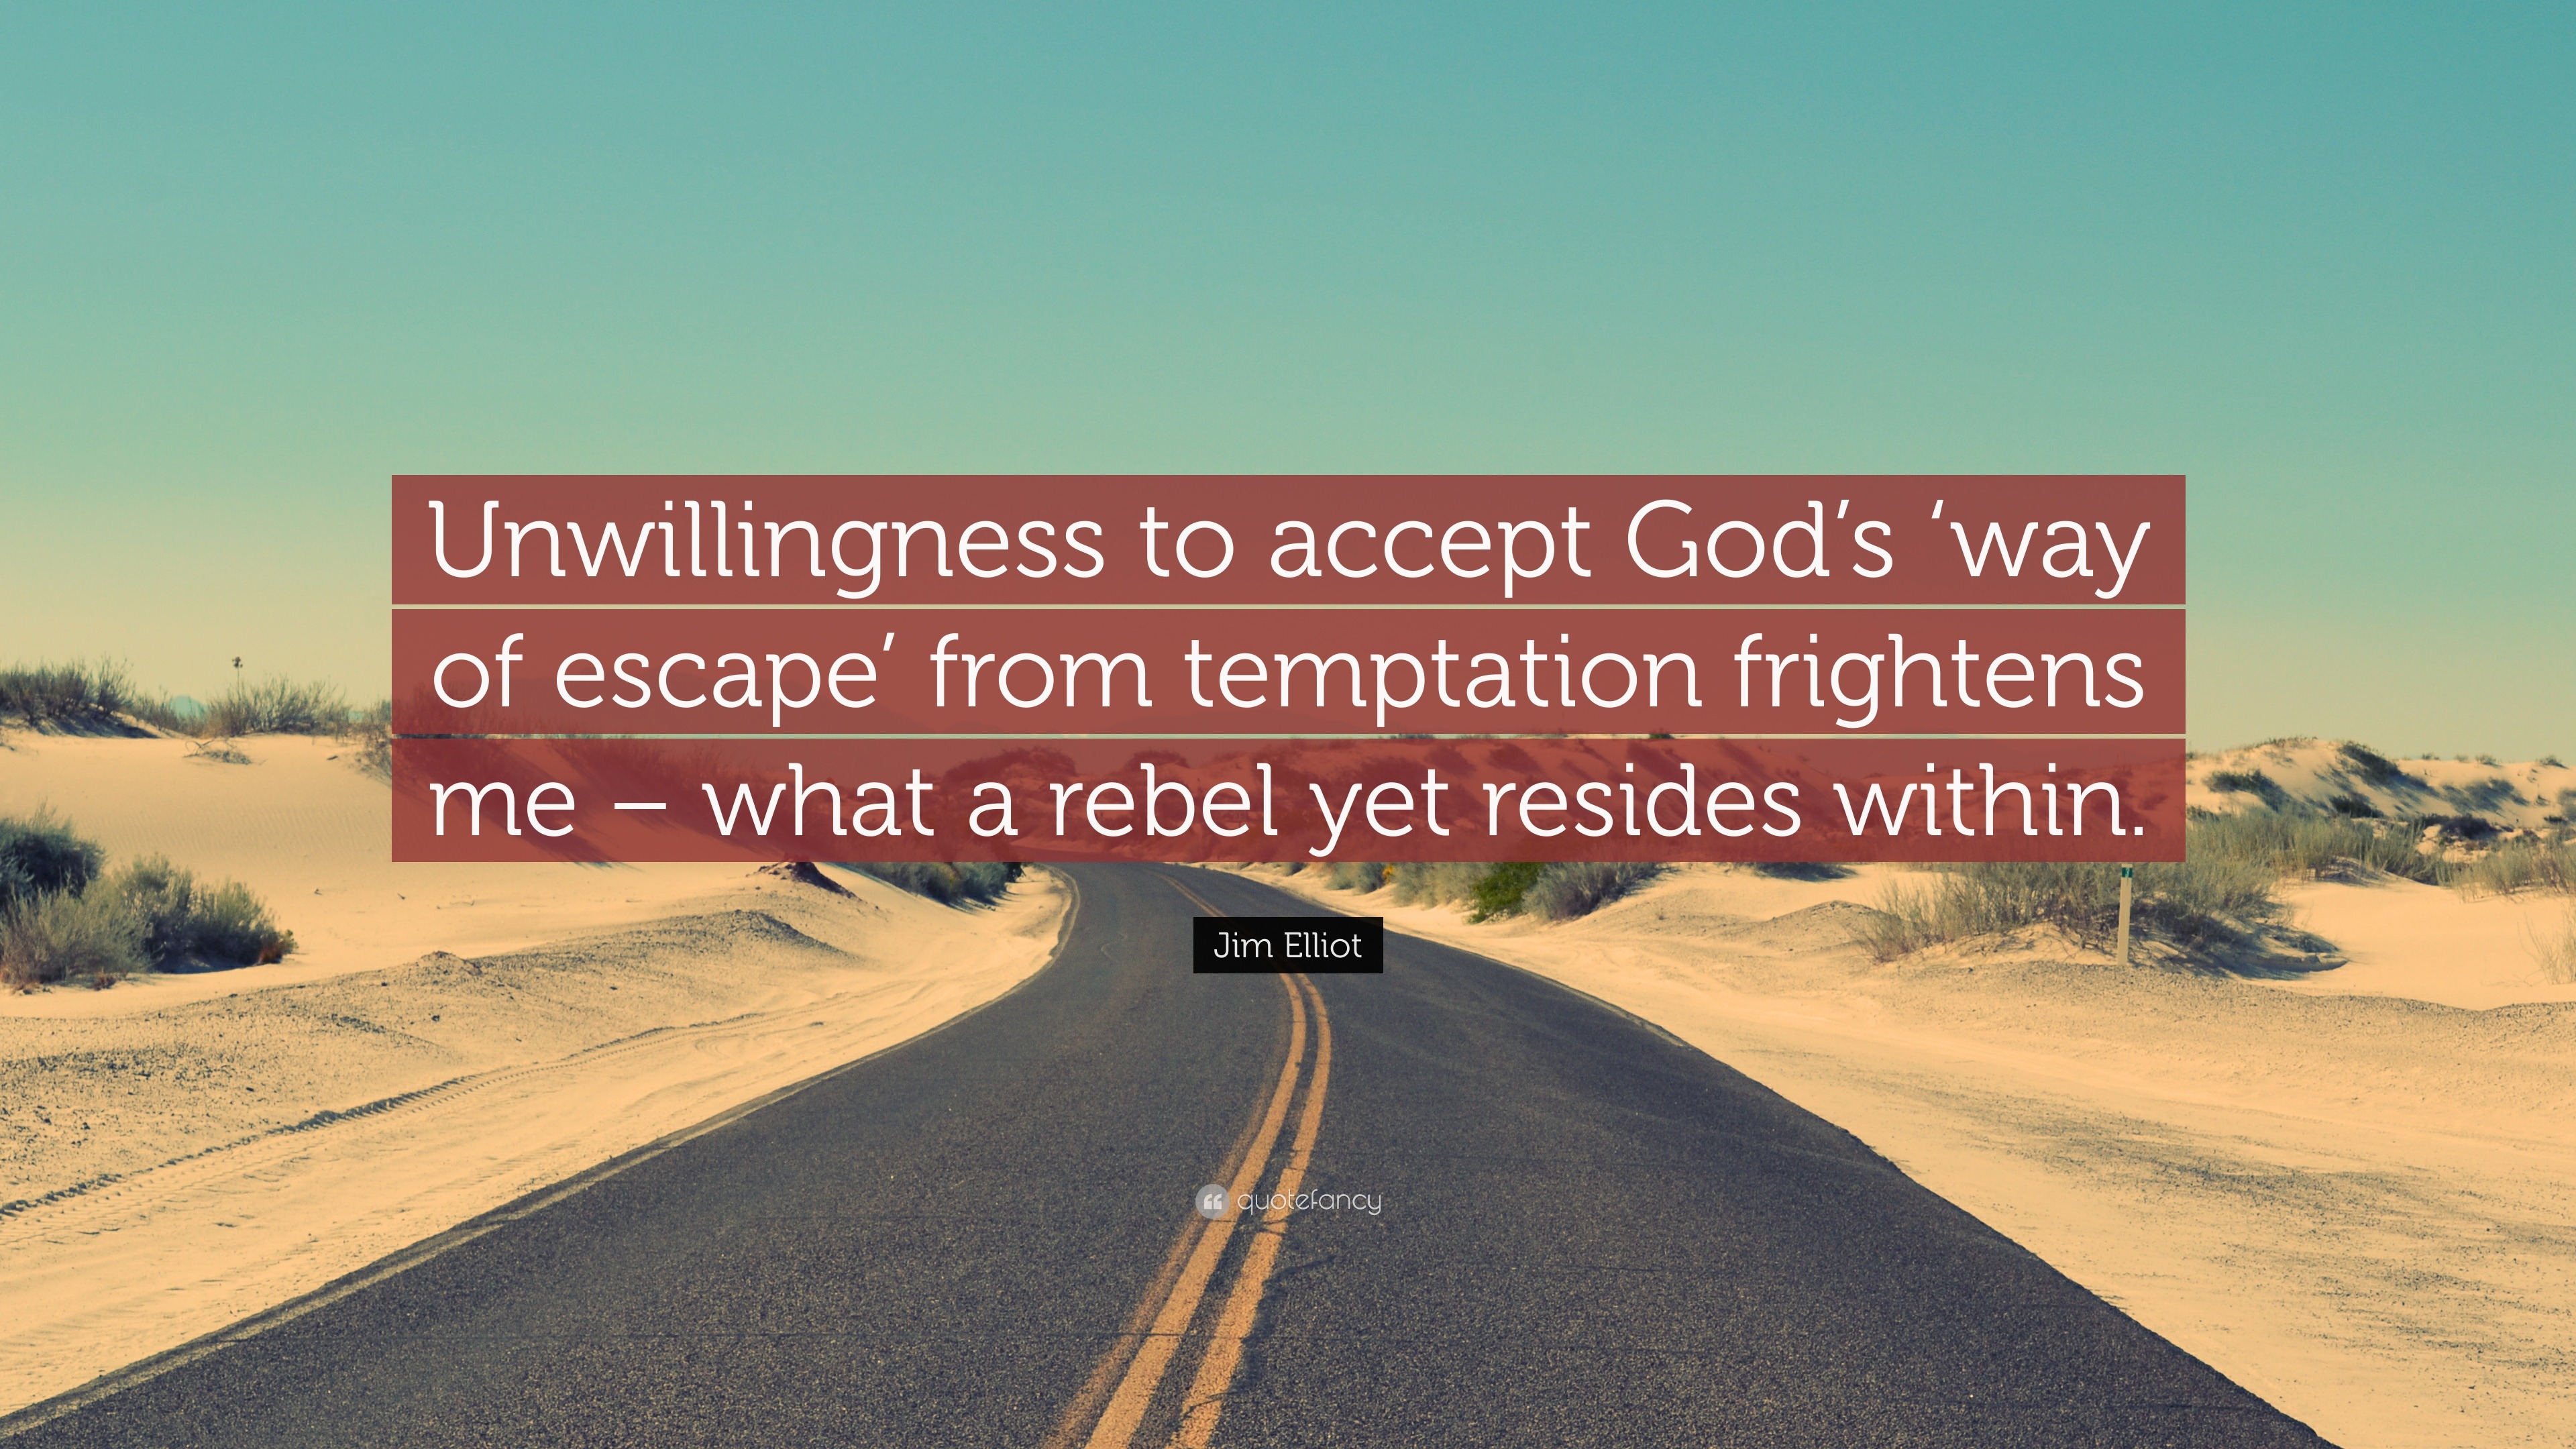 Jim Elliot Quote Unwillingness To Accept God S Way Of Escape From Temptation Frightens Me What A